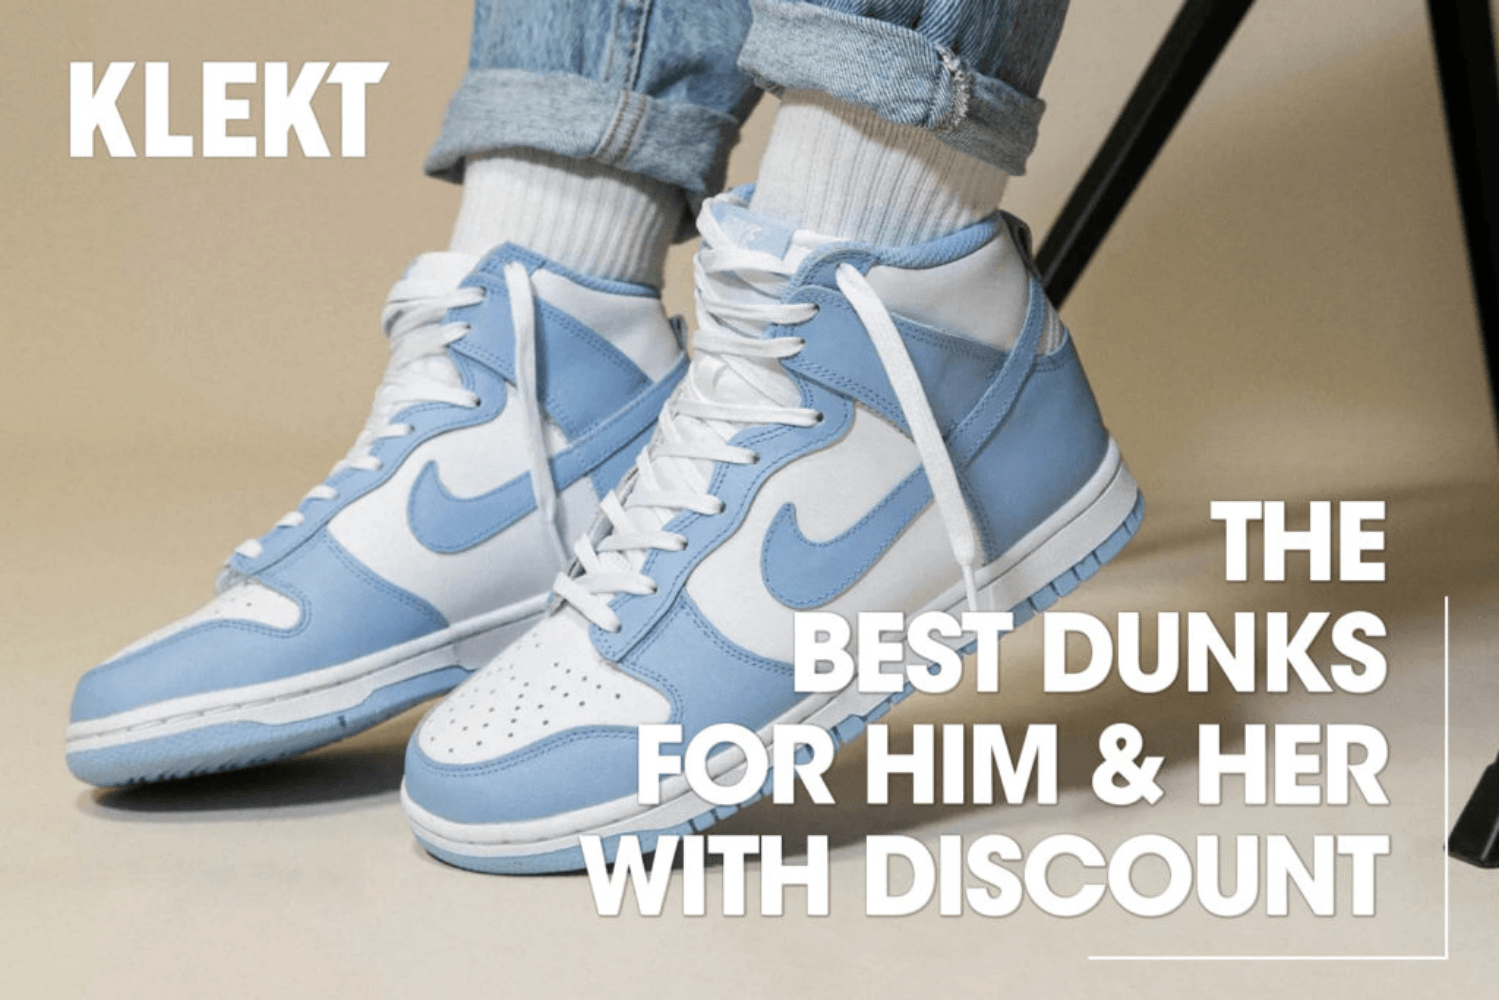 The best Dunks for him and her with discount at Klekt